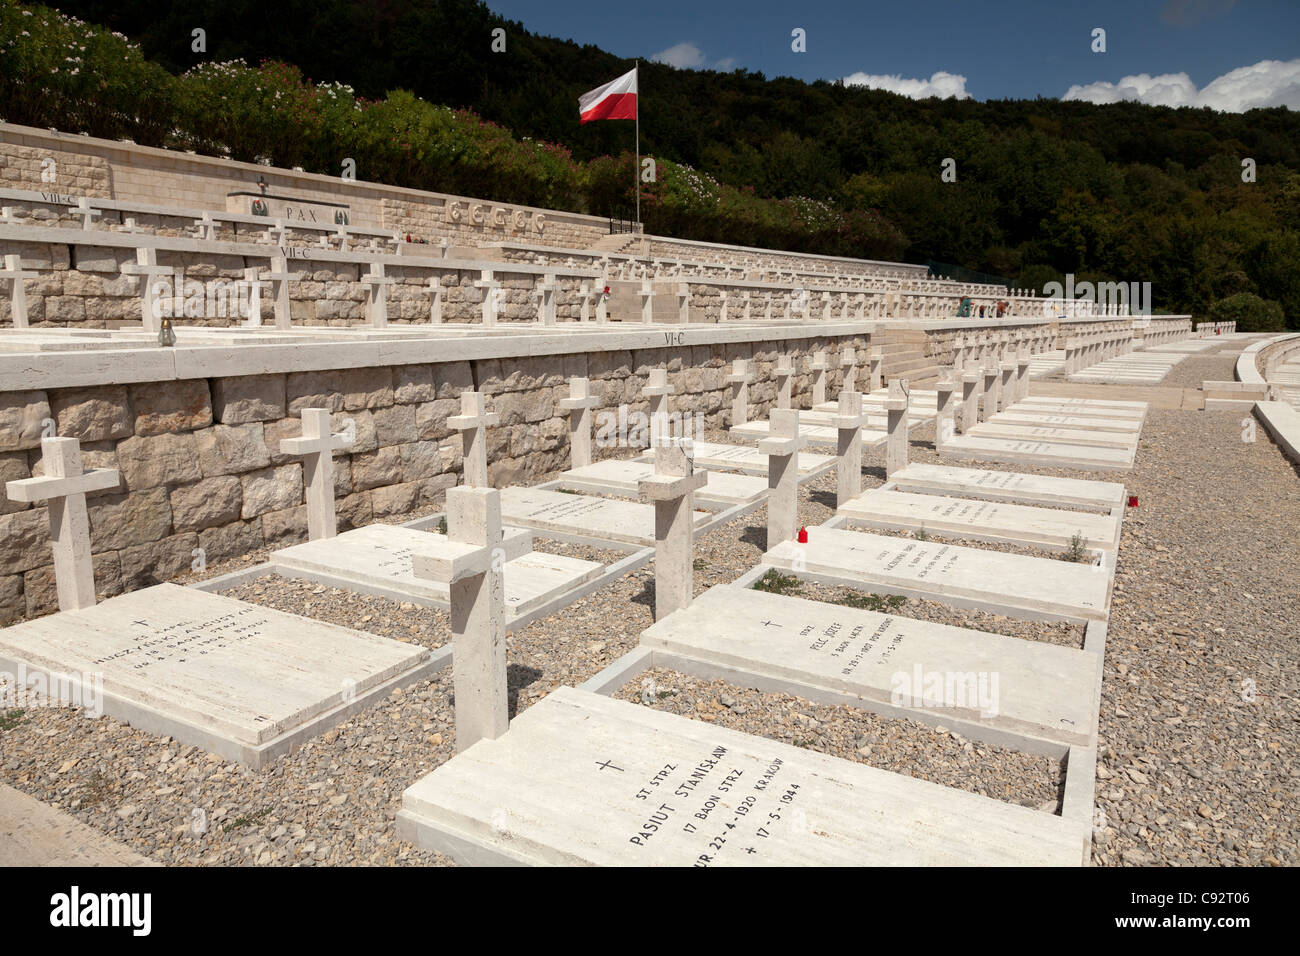 Rows of soldiers graves with crosses at The Polish Cemetery at Monte cassino. Stock Photo